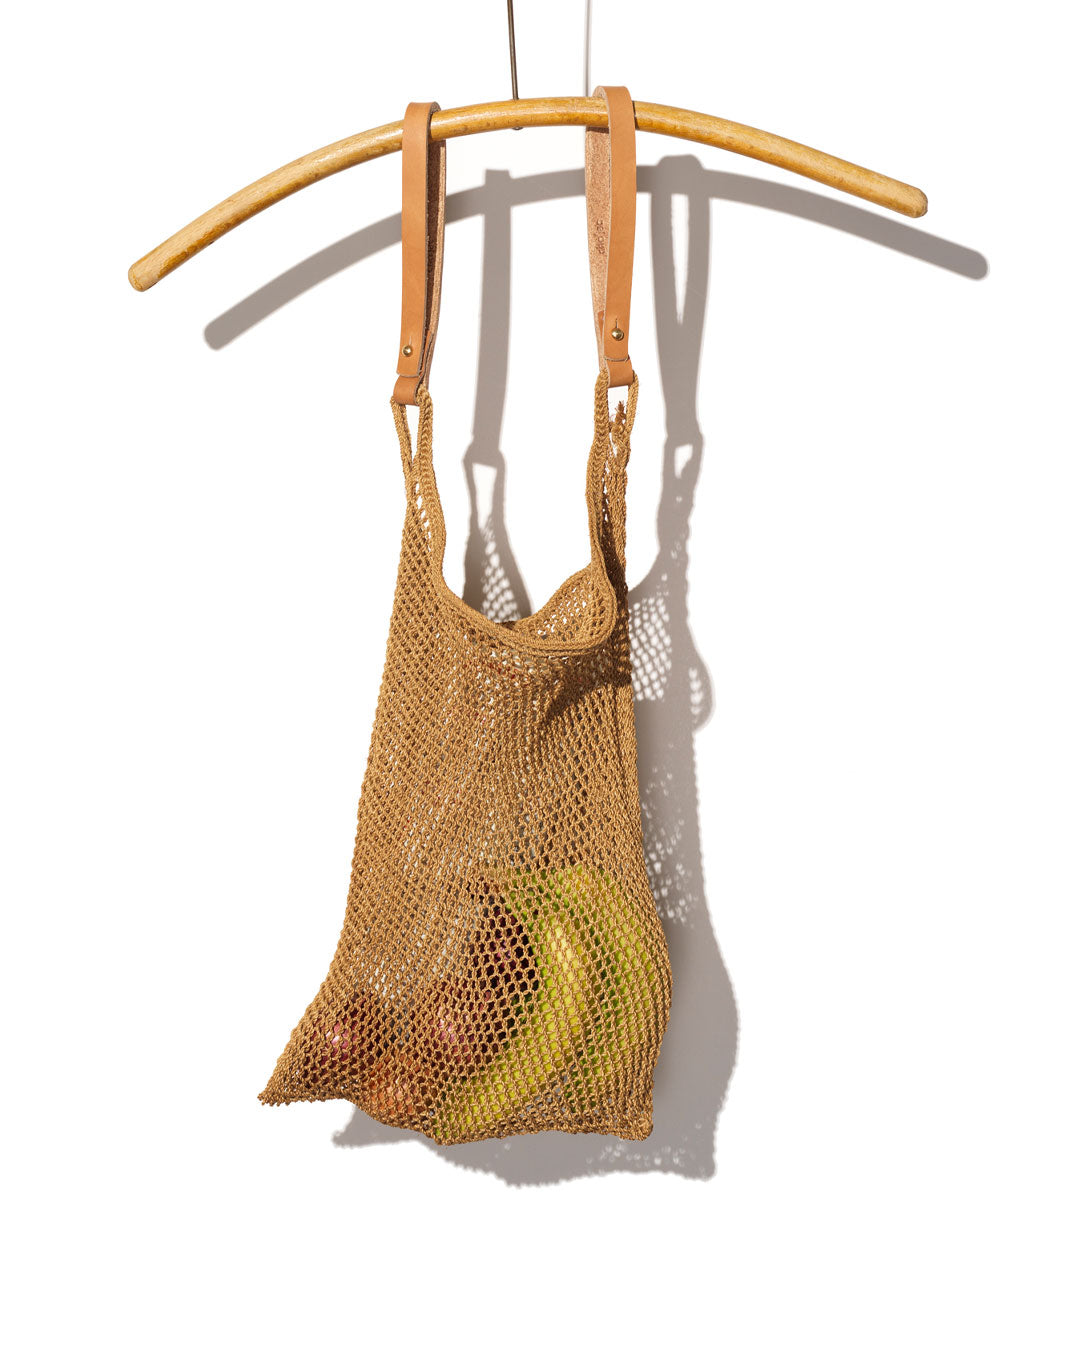 The String bag (two-in-one)